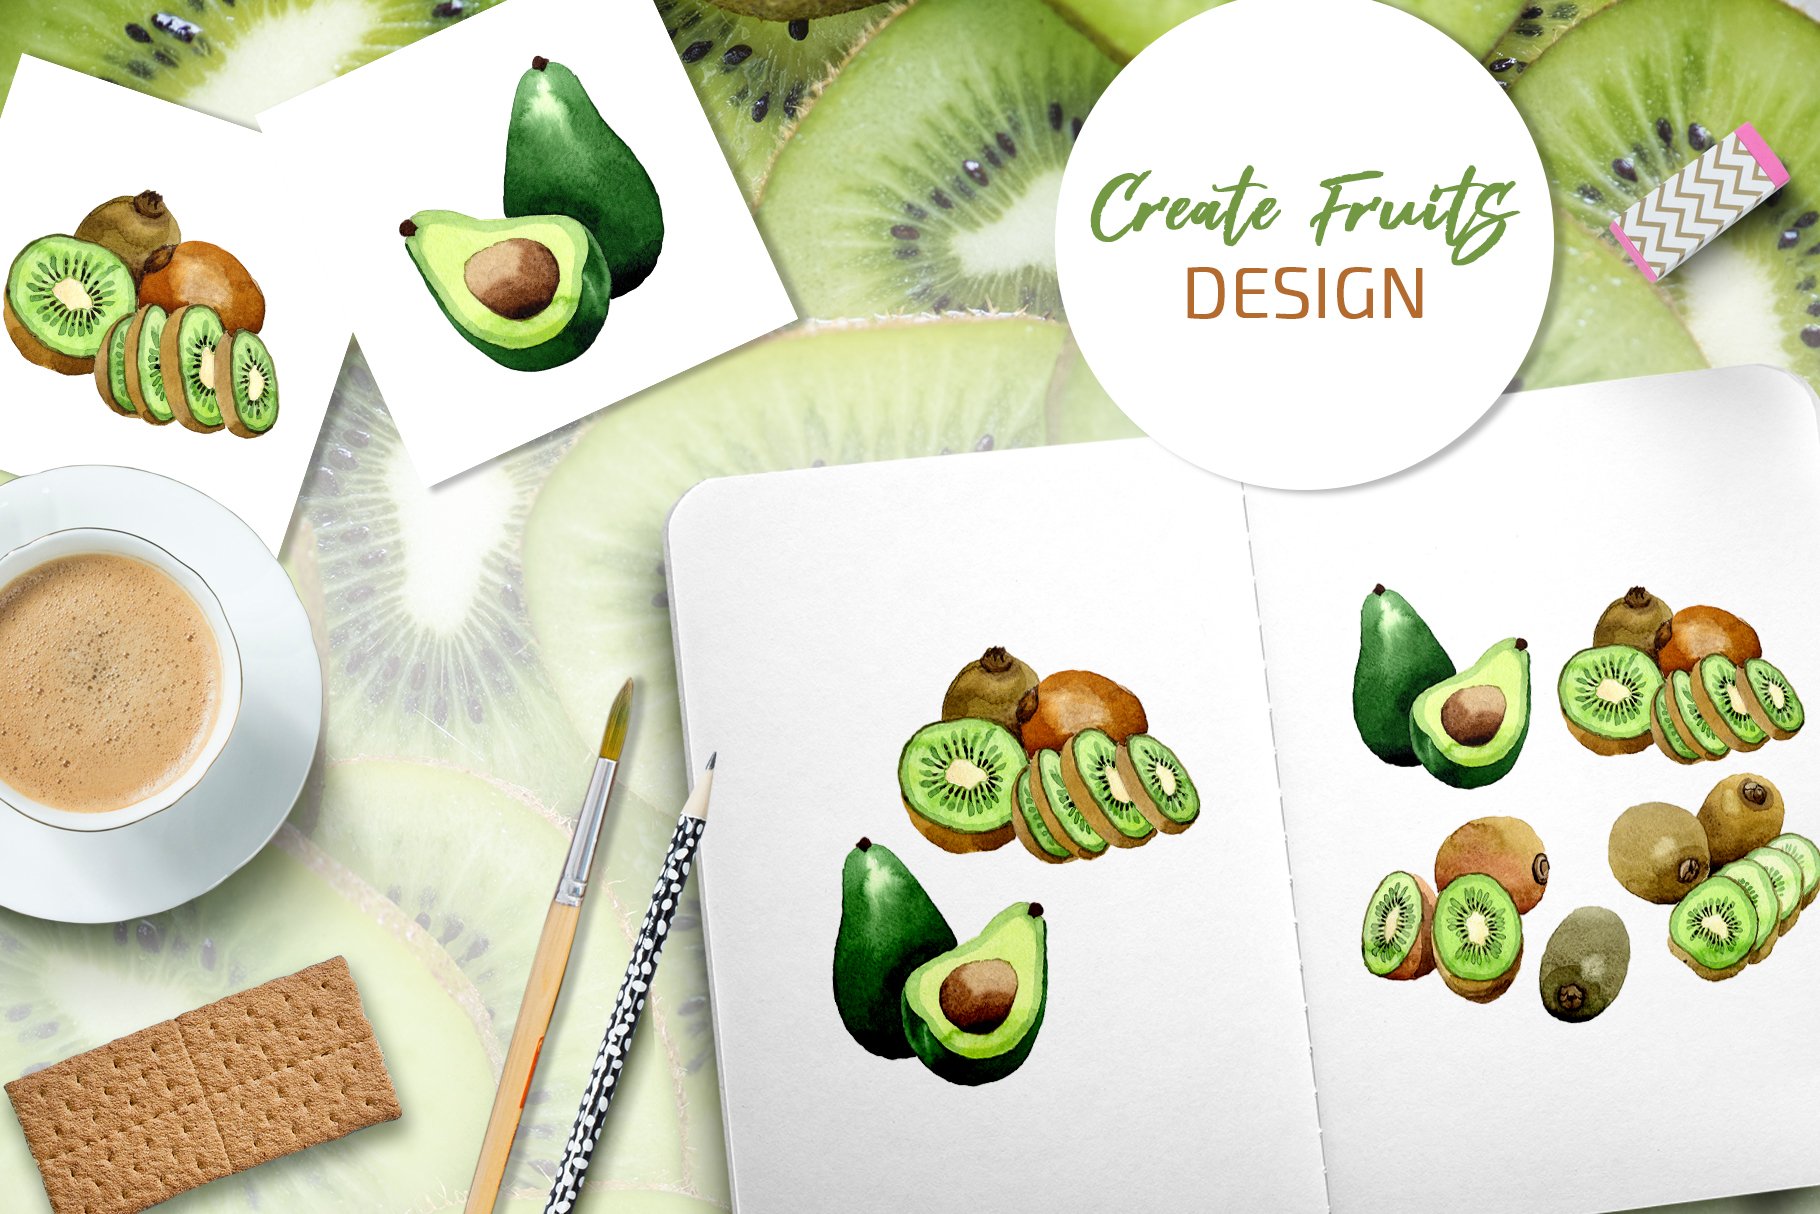 Cool avocado and kiwi mix on the white paper.